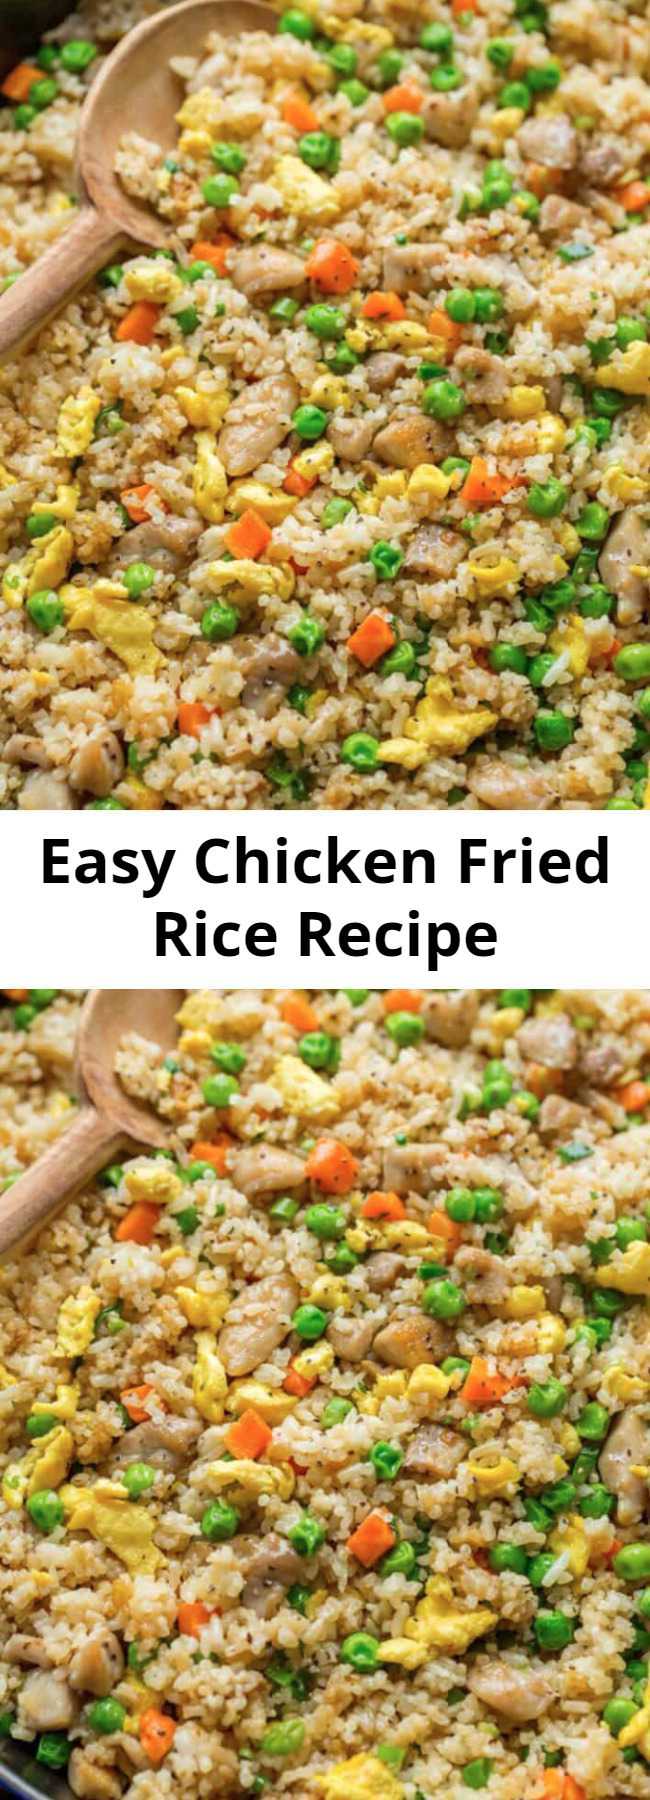 Easy Chicken Fried Rice Recipe - Chicken Fried Rice is one of our go-to EASY 30-minute meals. Fried Rice is perfect for meal prep and a genius way to use leftovers. It's actually even better with leftover rice. #chickenfriedrice #friedrice #chickenrecipes #30minutemeals #rice #friedricerecipe